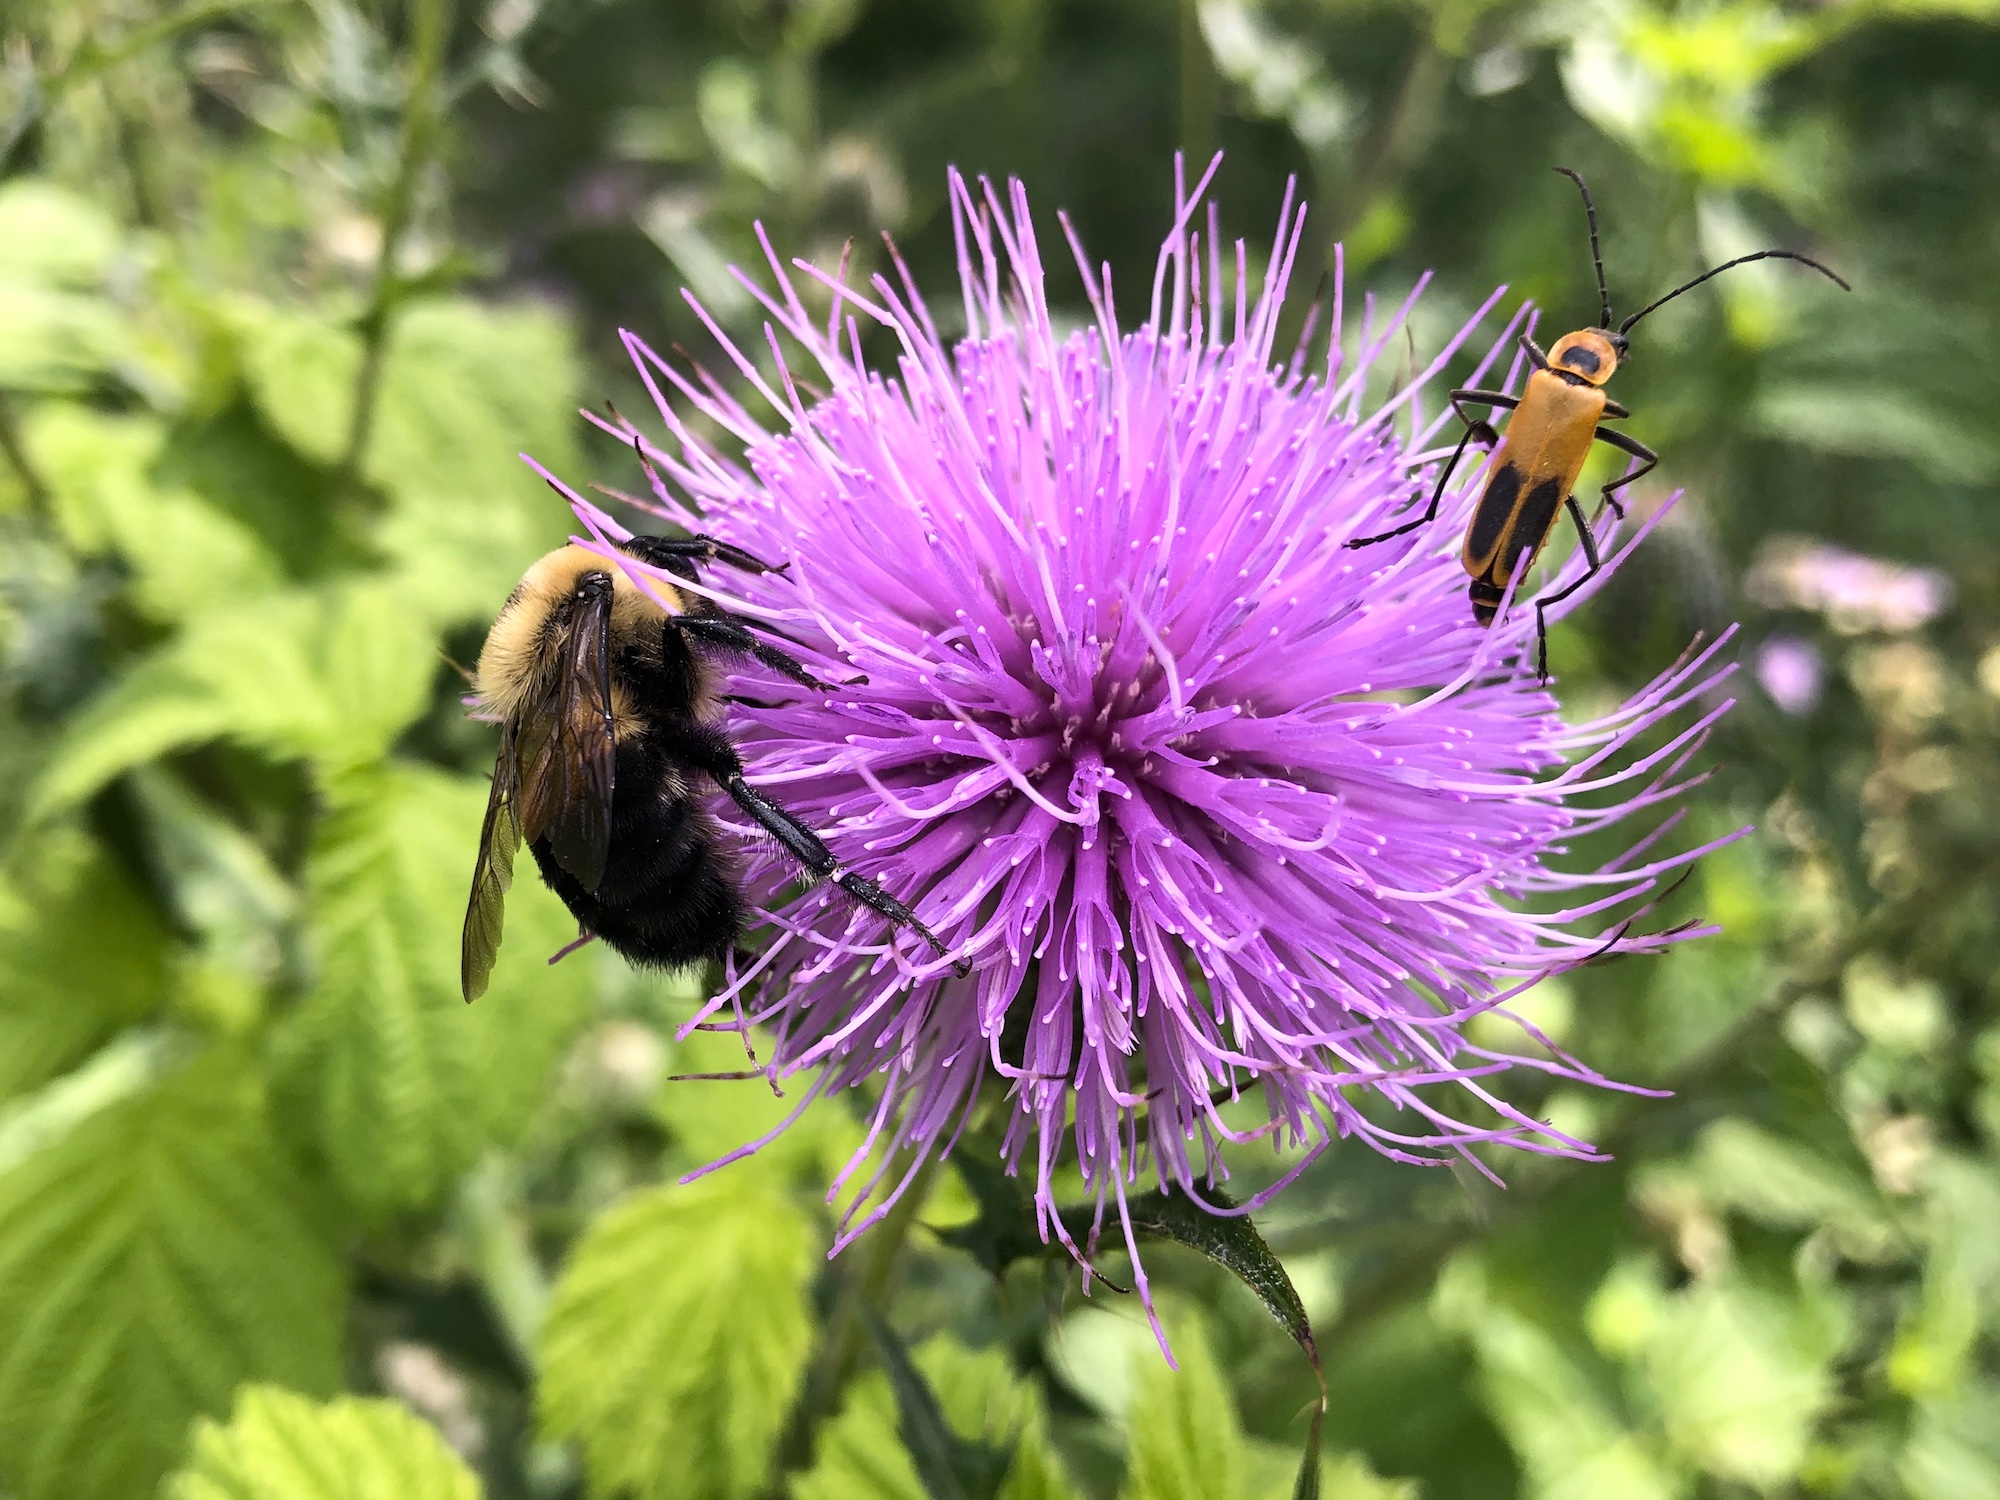 Bumblebee on Thistle on August 4, 2020.